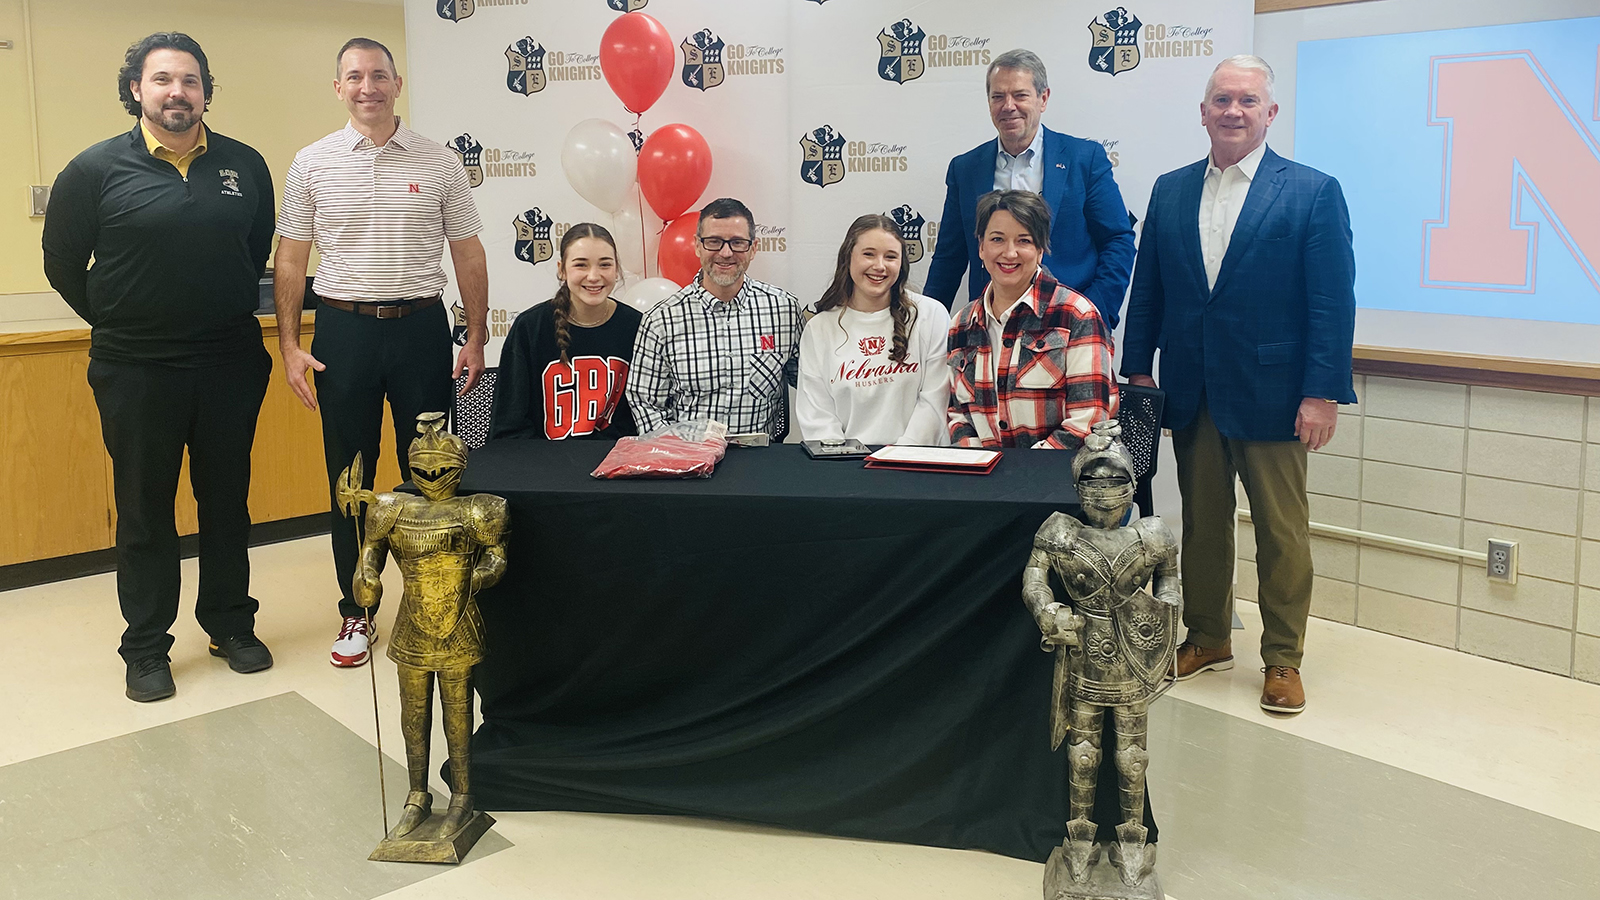 Lillias McKillip is joined at the signing day at Lincoln Southeast High School by her sister Bea, parents Austin and Jessica, Southeast Principal Tanner Penrod, Gov. Jim Pillen, University of Nebraska Interim President Chris Kabourek, and Regent Tim Clare of Lincoln